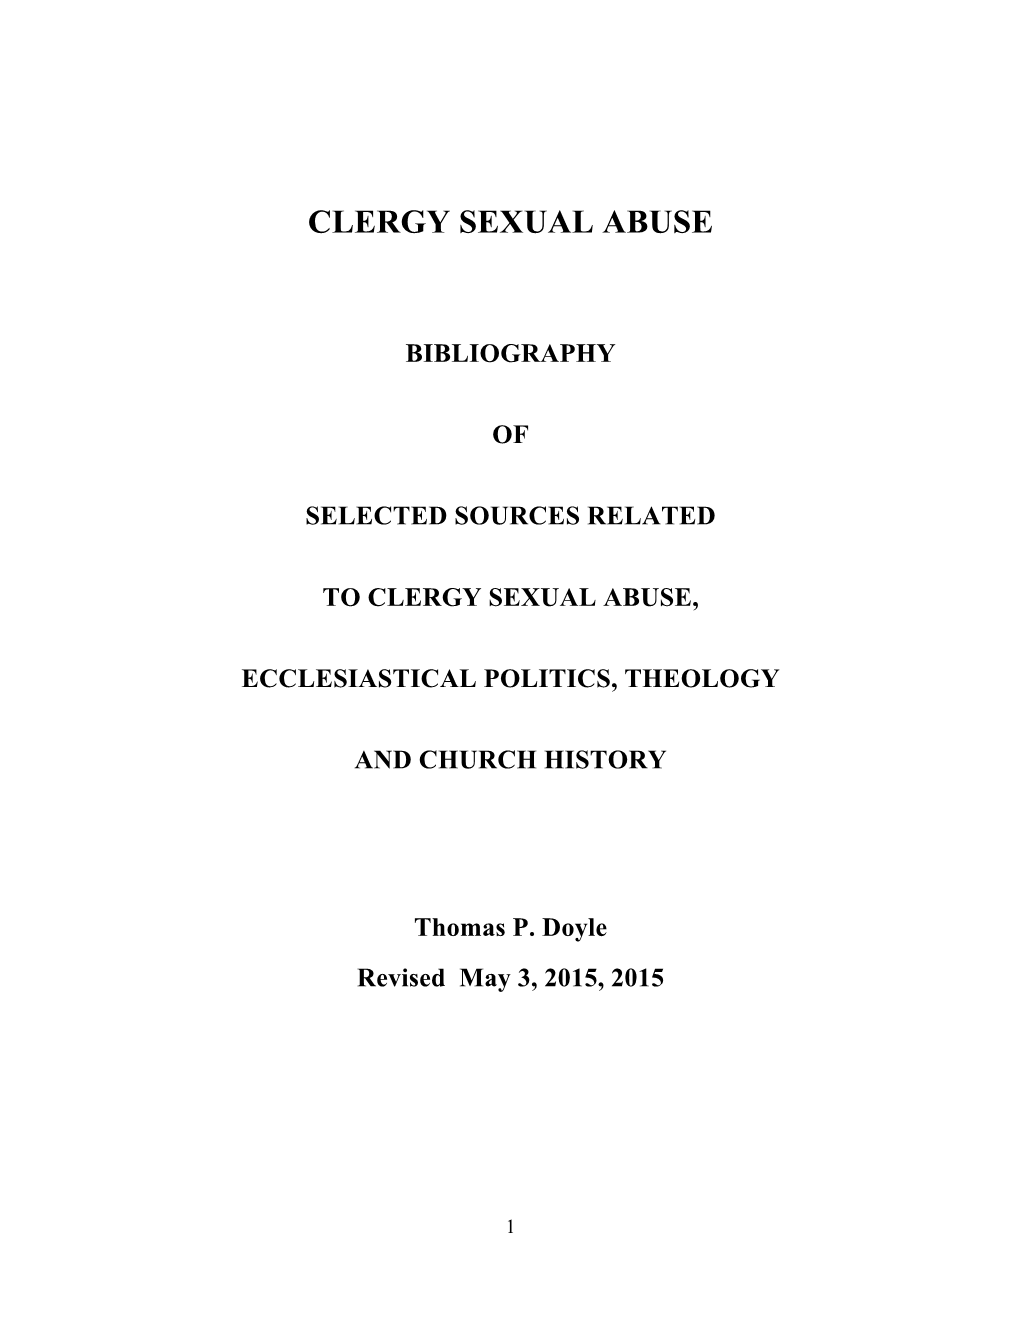 Fr. Tom Doyle Clergy Sexual Abuse Bibliography